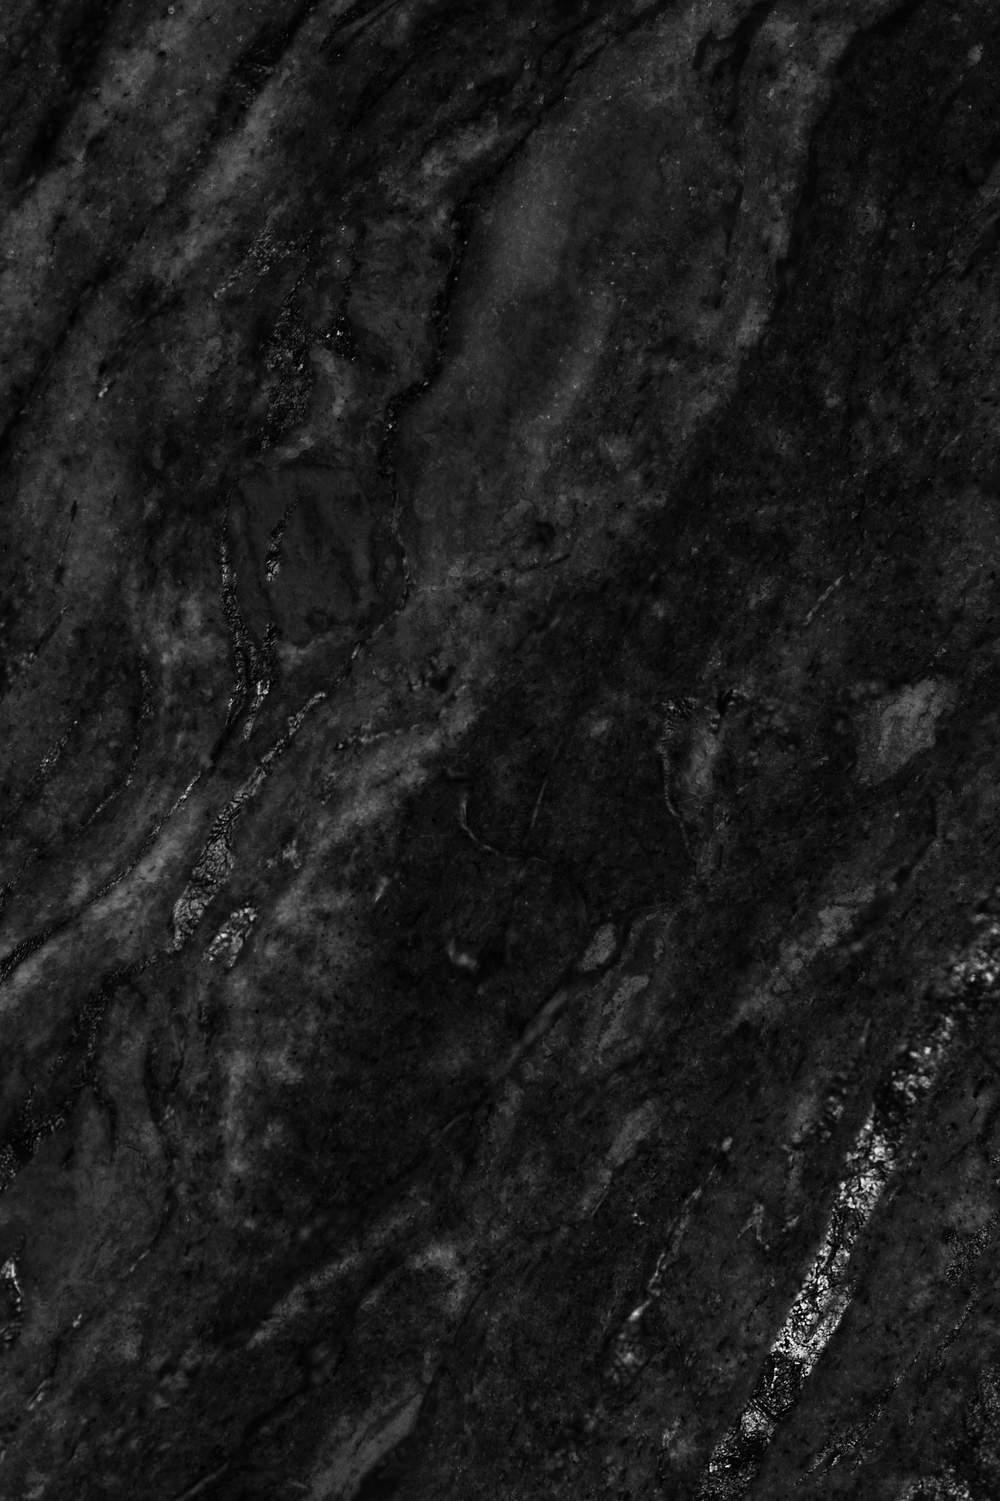 Black Marble Images | Free Vectors, PNGs, Mockups & Backgrounds - rawpixel